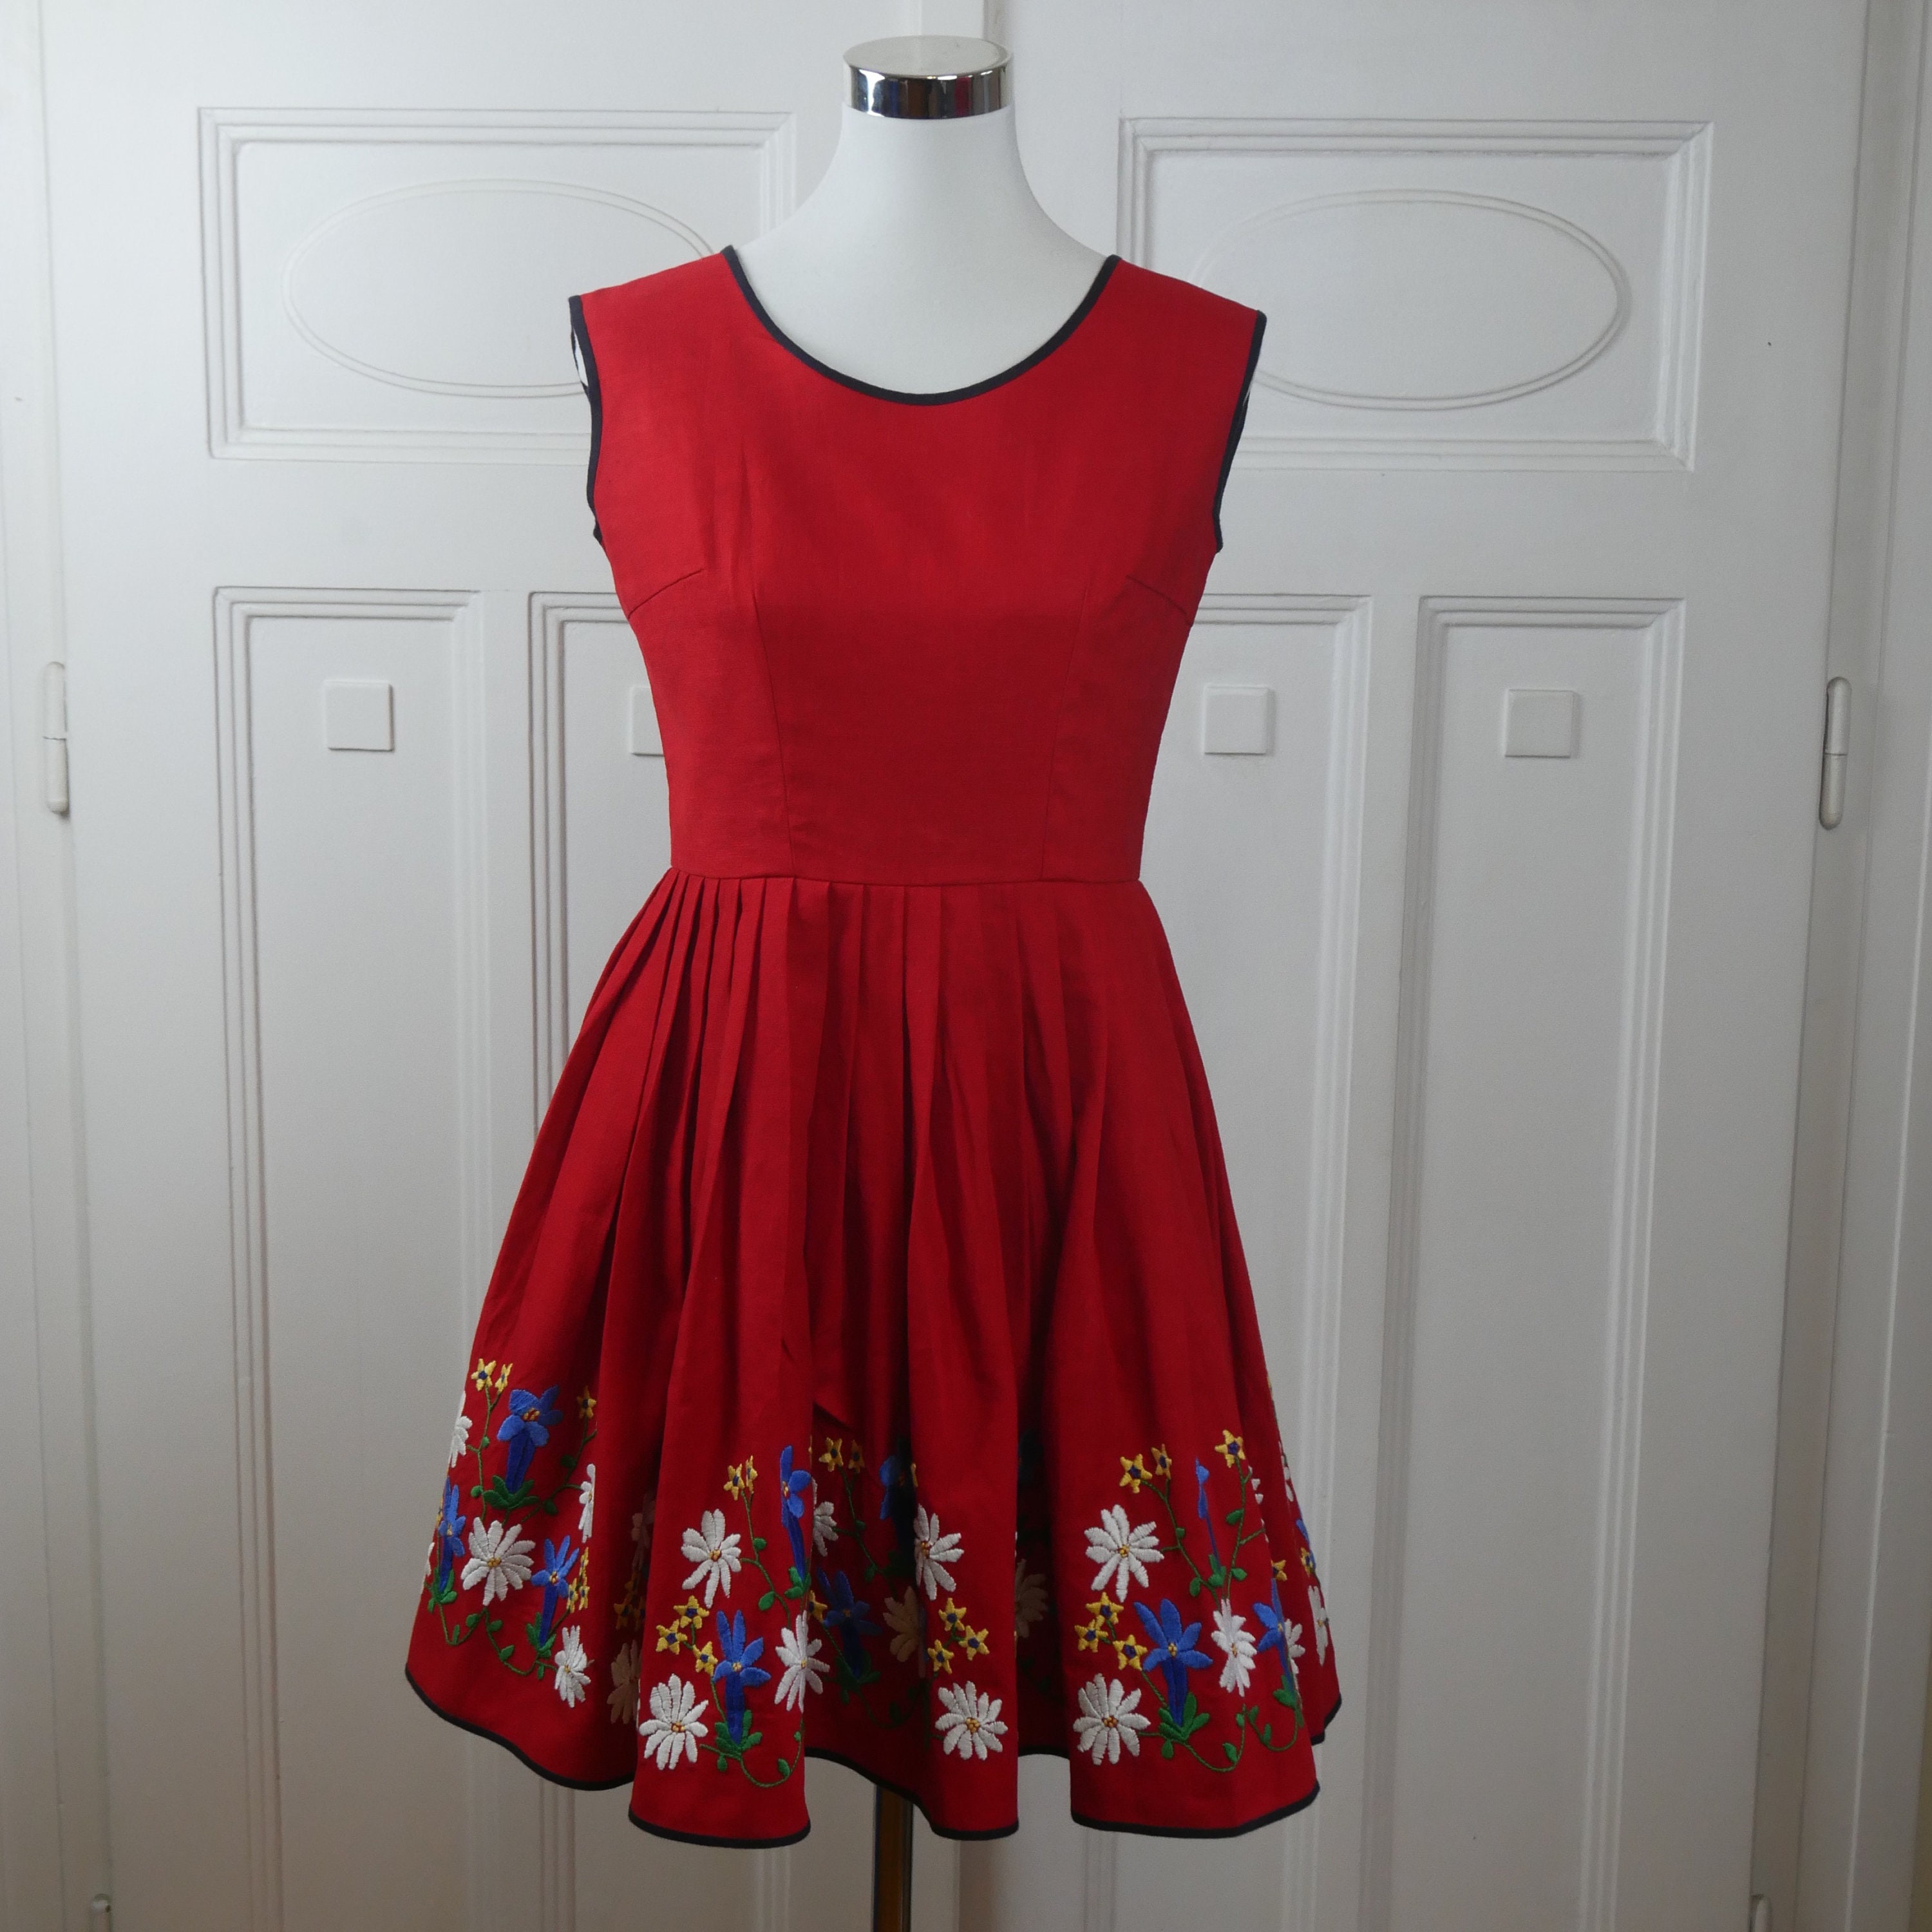 Red Cotton Sleeveless Summer Embroidered Dress European - Etsy